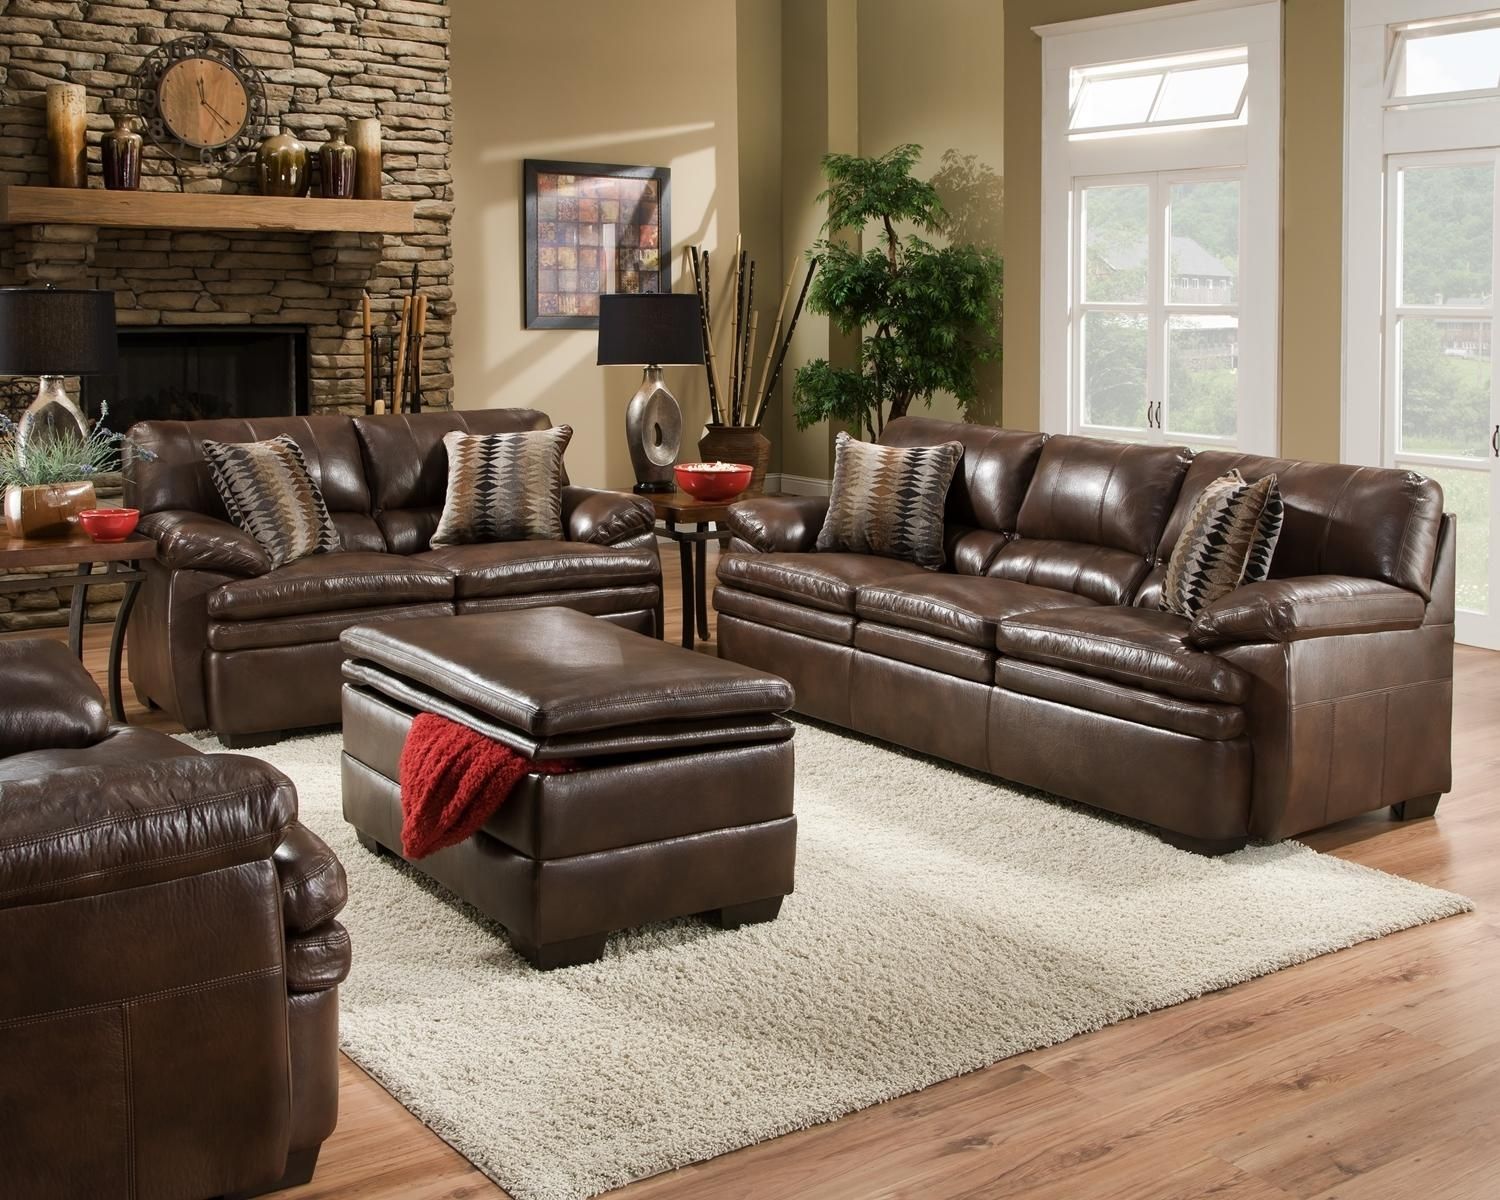 Leather Sofa Living Room Intended For Casual Sofas And Chairs (View 8 of 21)